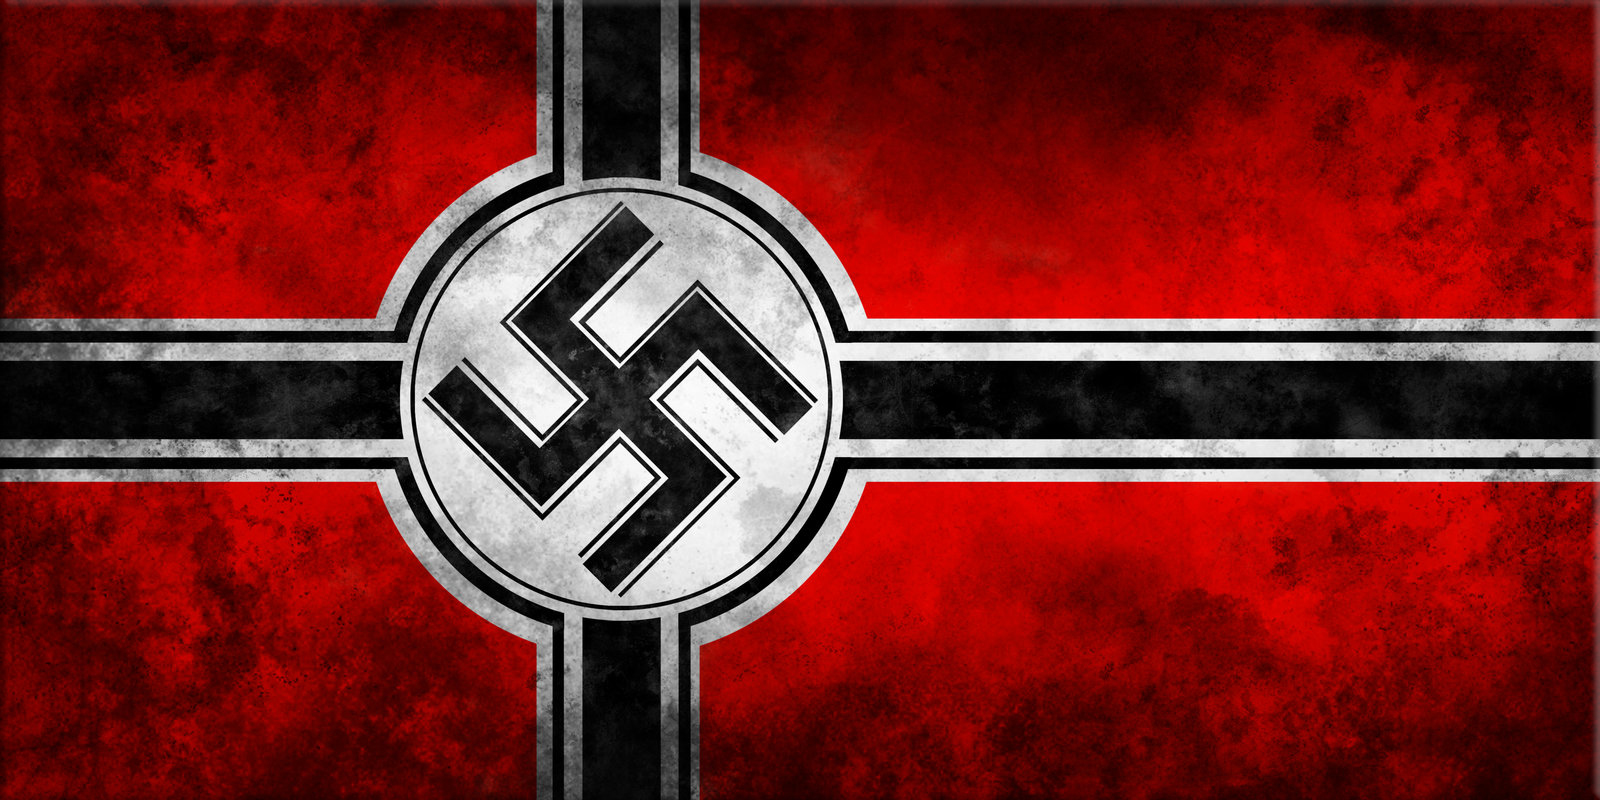 Nazi Germany adopts a new national flag with the swastika